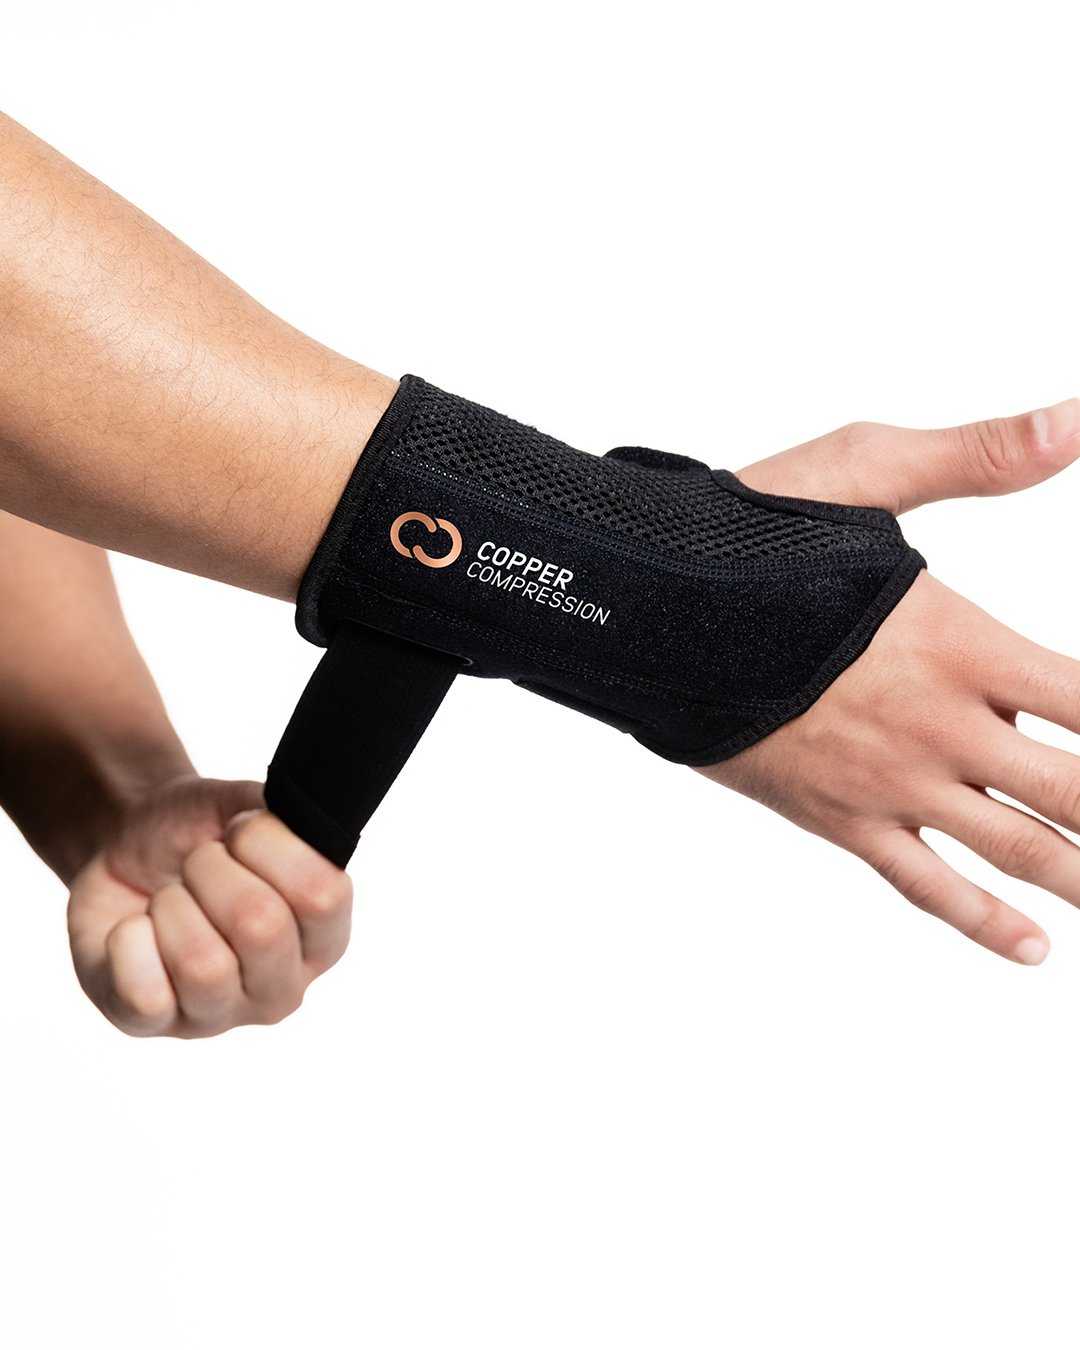 Copper Compression Wrist Brace - Copper Infused Adjustable Orthopedic  Support Splint for Pain, Carpal Tunnel, Arthritis, Tennis Elbow,  Tendinitis, RSI, Ganglion Cyst for Men Women - Right Hand - S/M : Health &  Household 